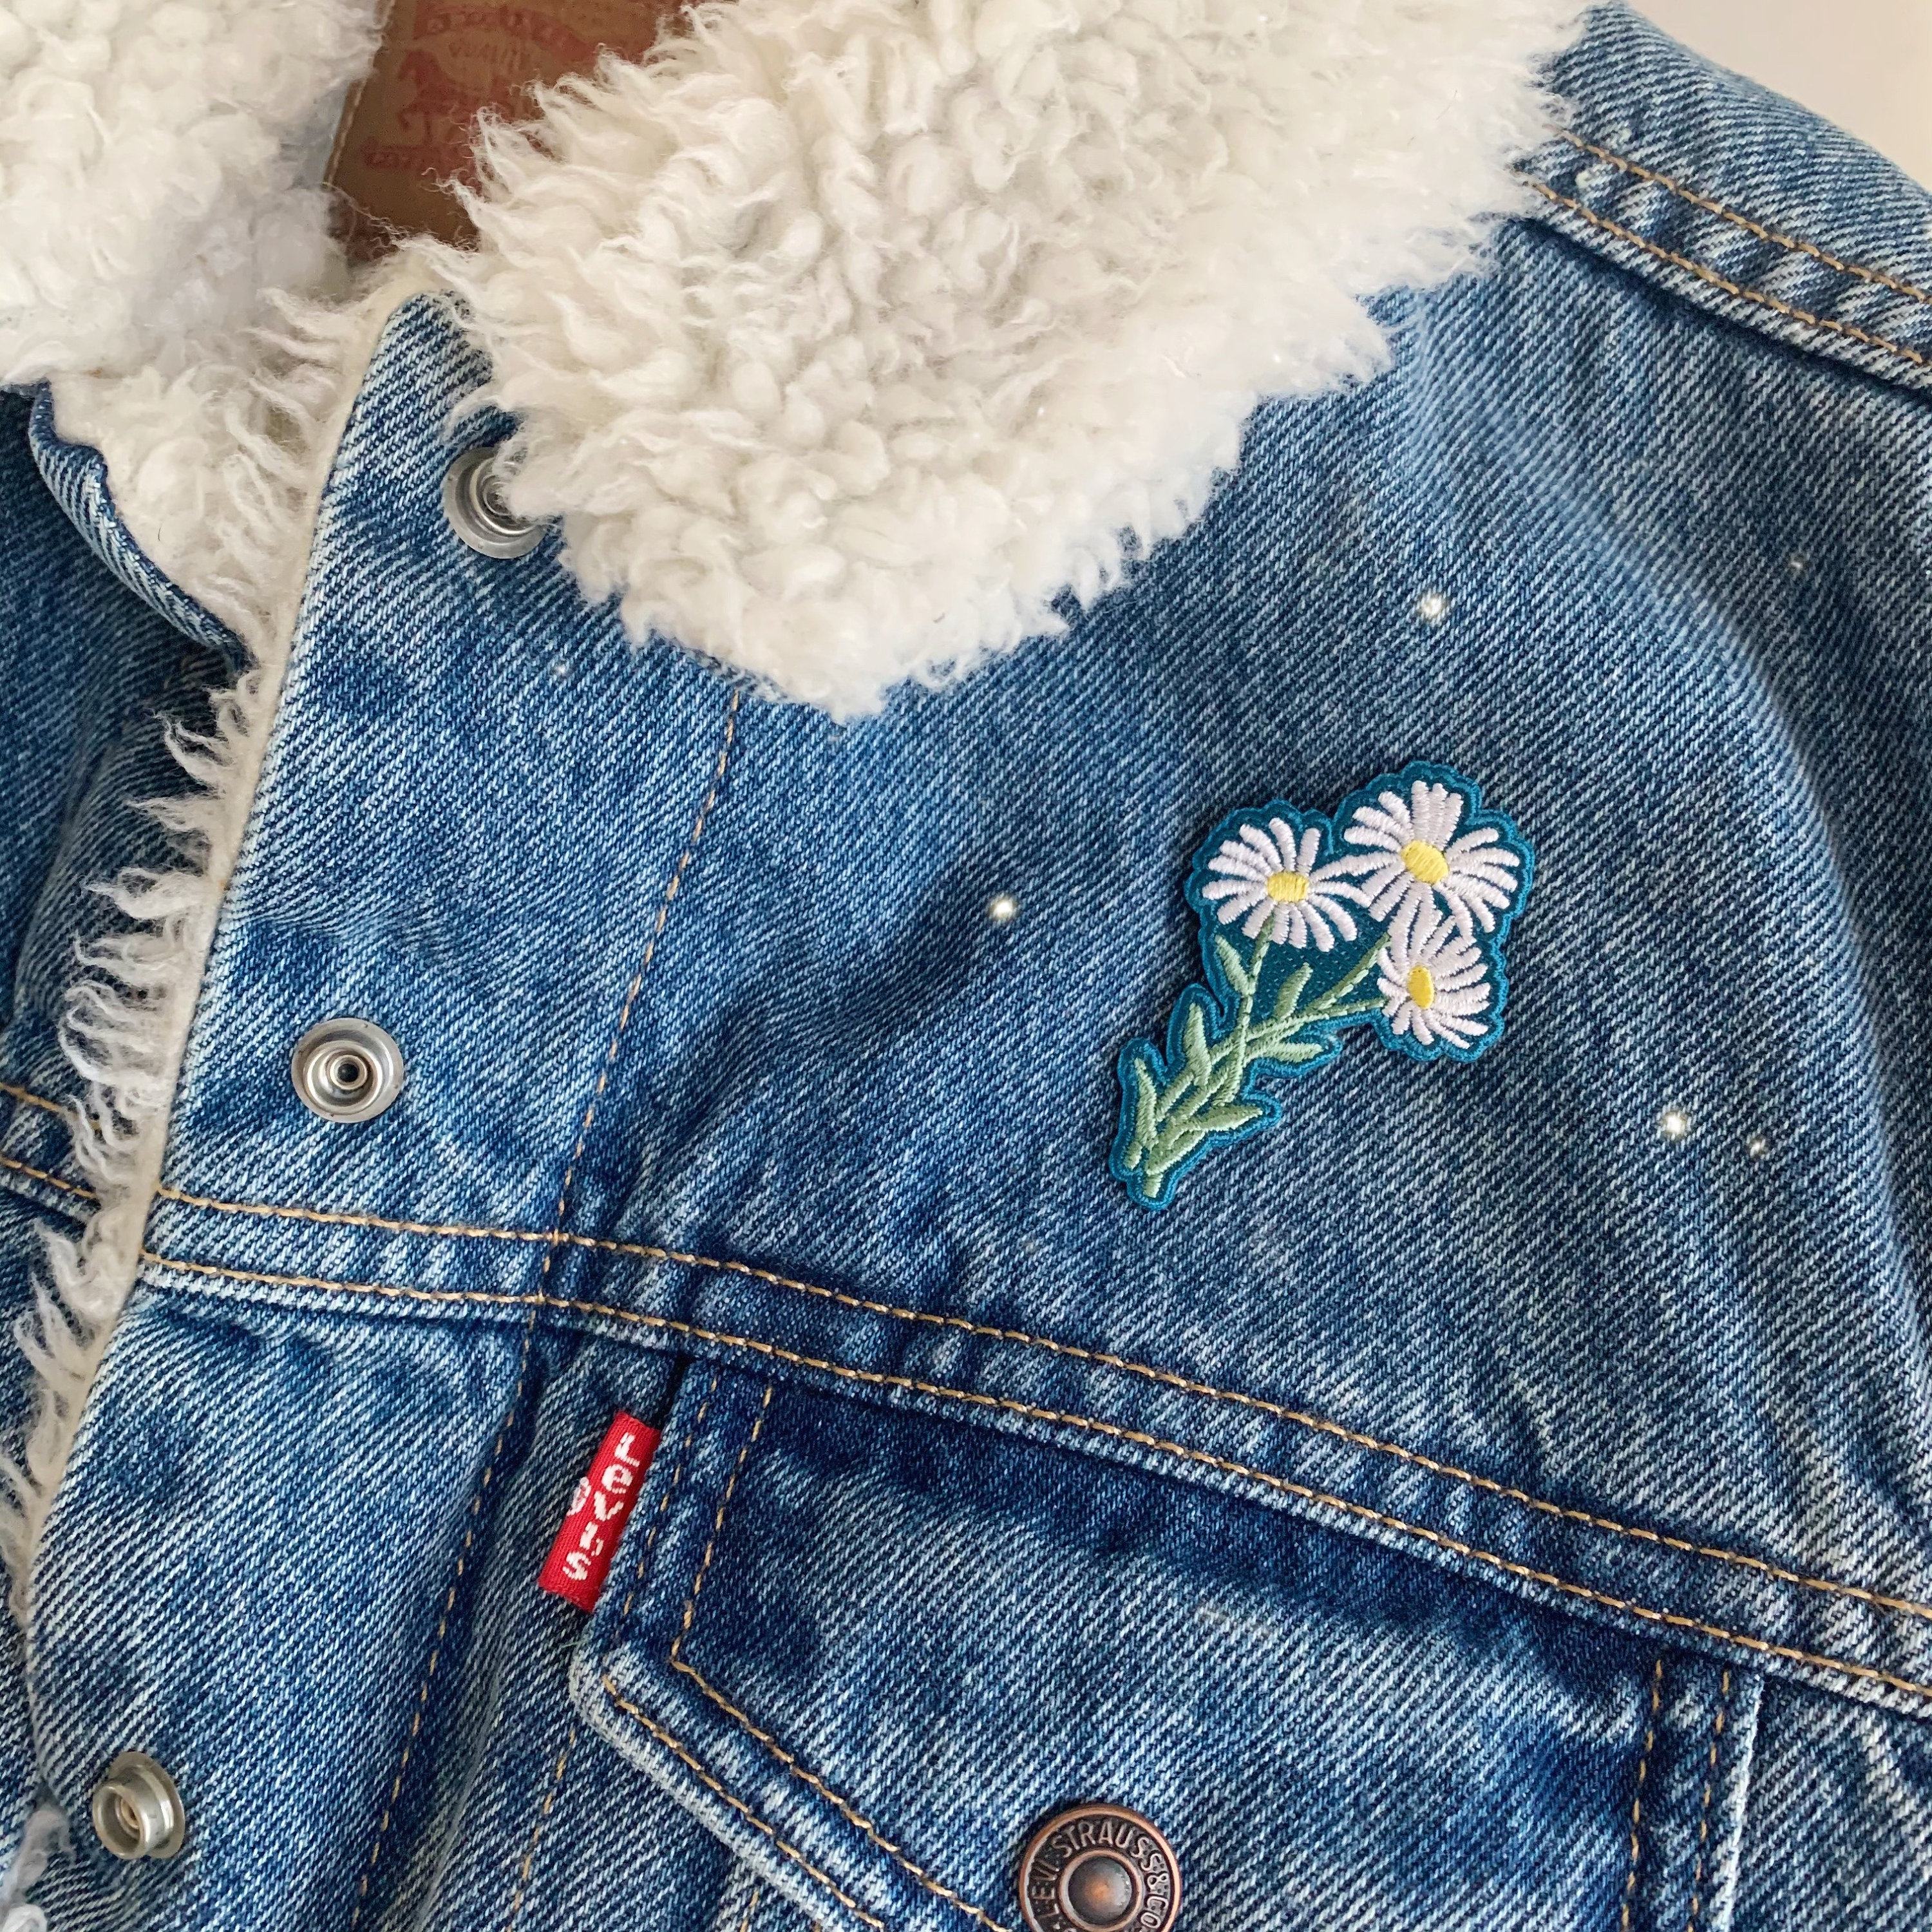 Botanical Cottagecore Iron on Patch Embroidered Patches Floral Venus Yin  Yang Moon Fern Wildflowers Daisy Sunflower Bicycle Lavender Flower -   Hong Kong